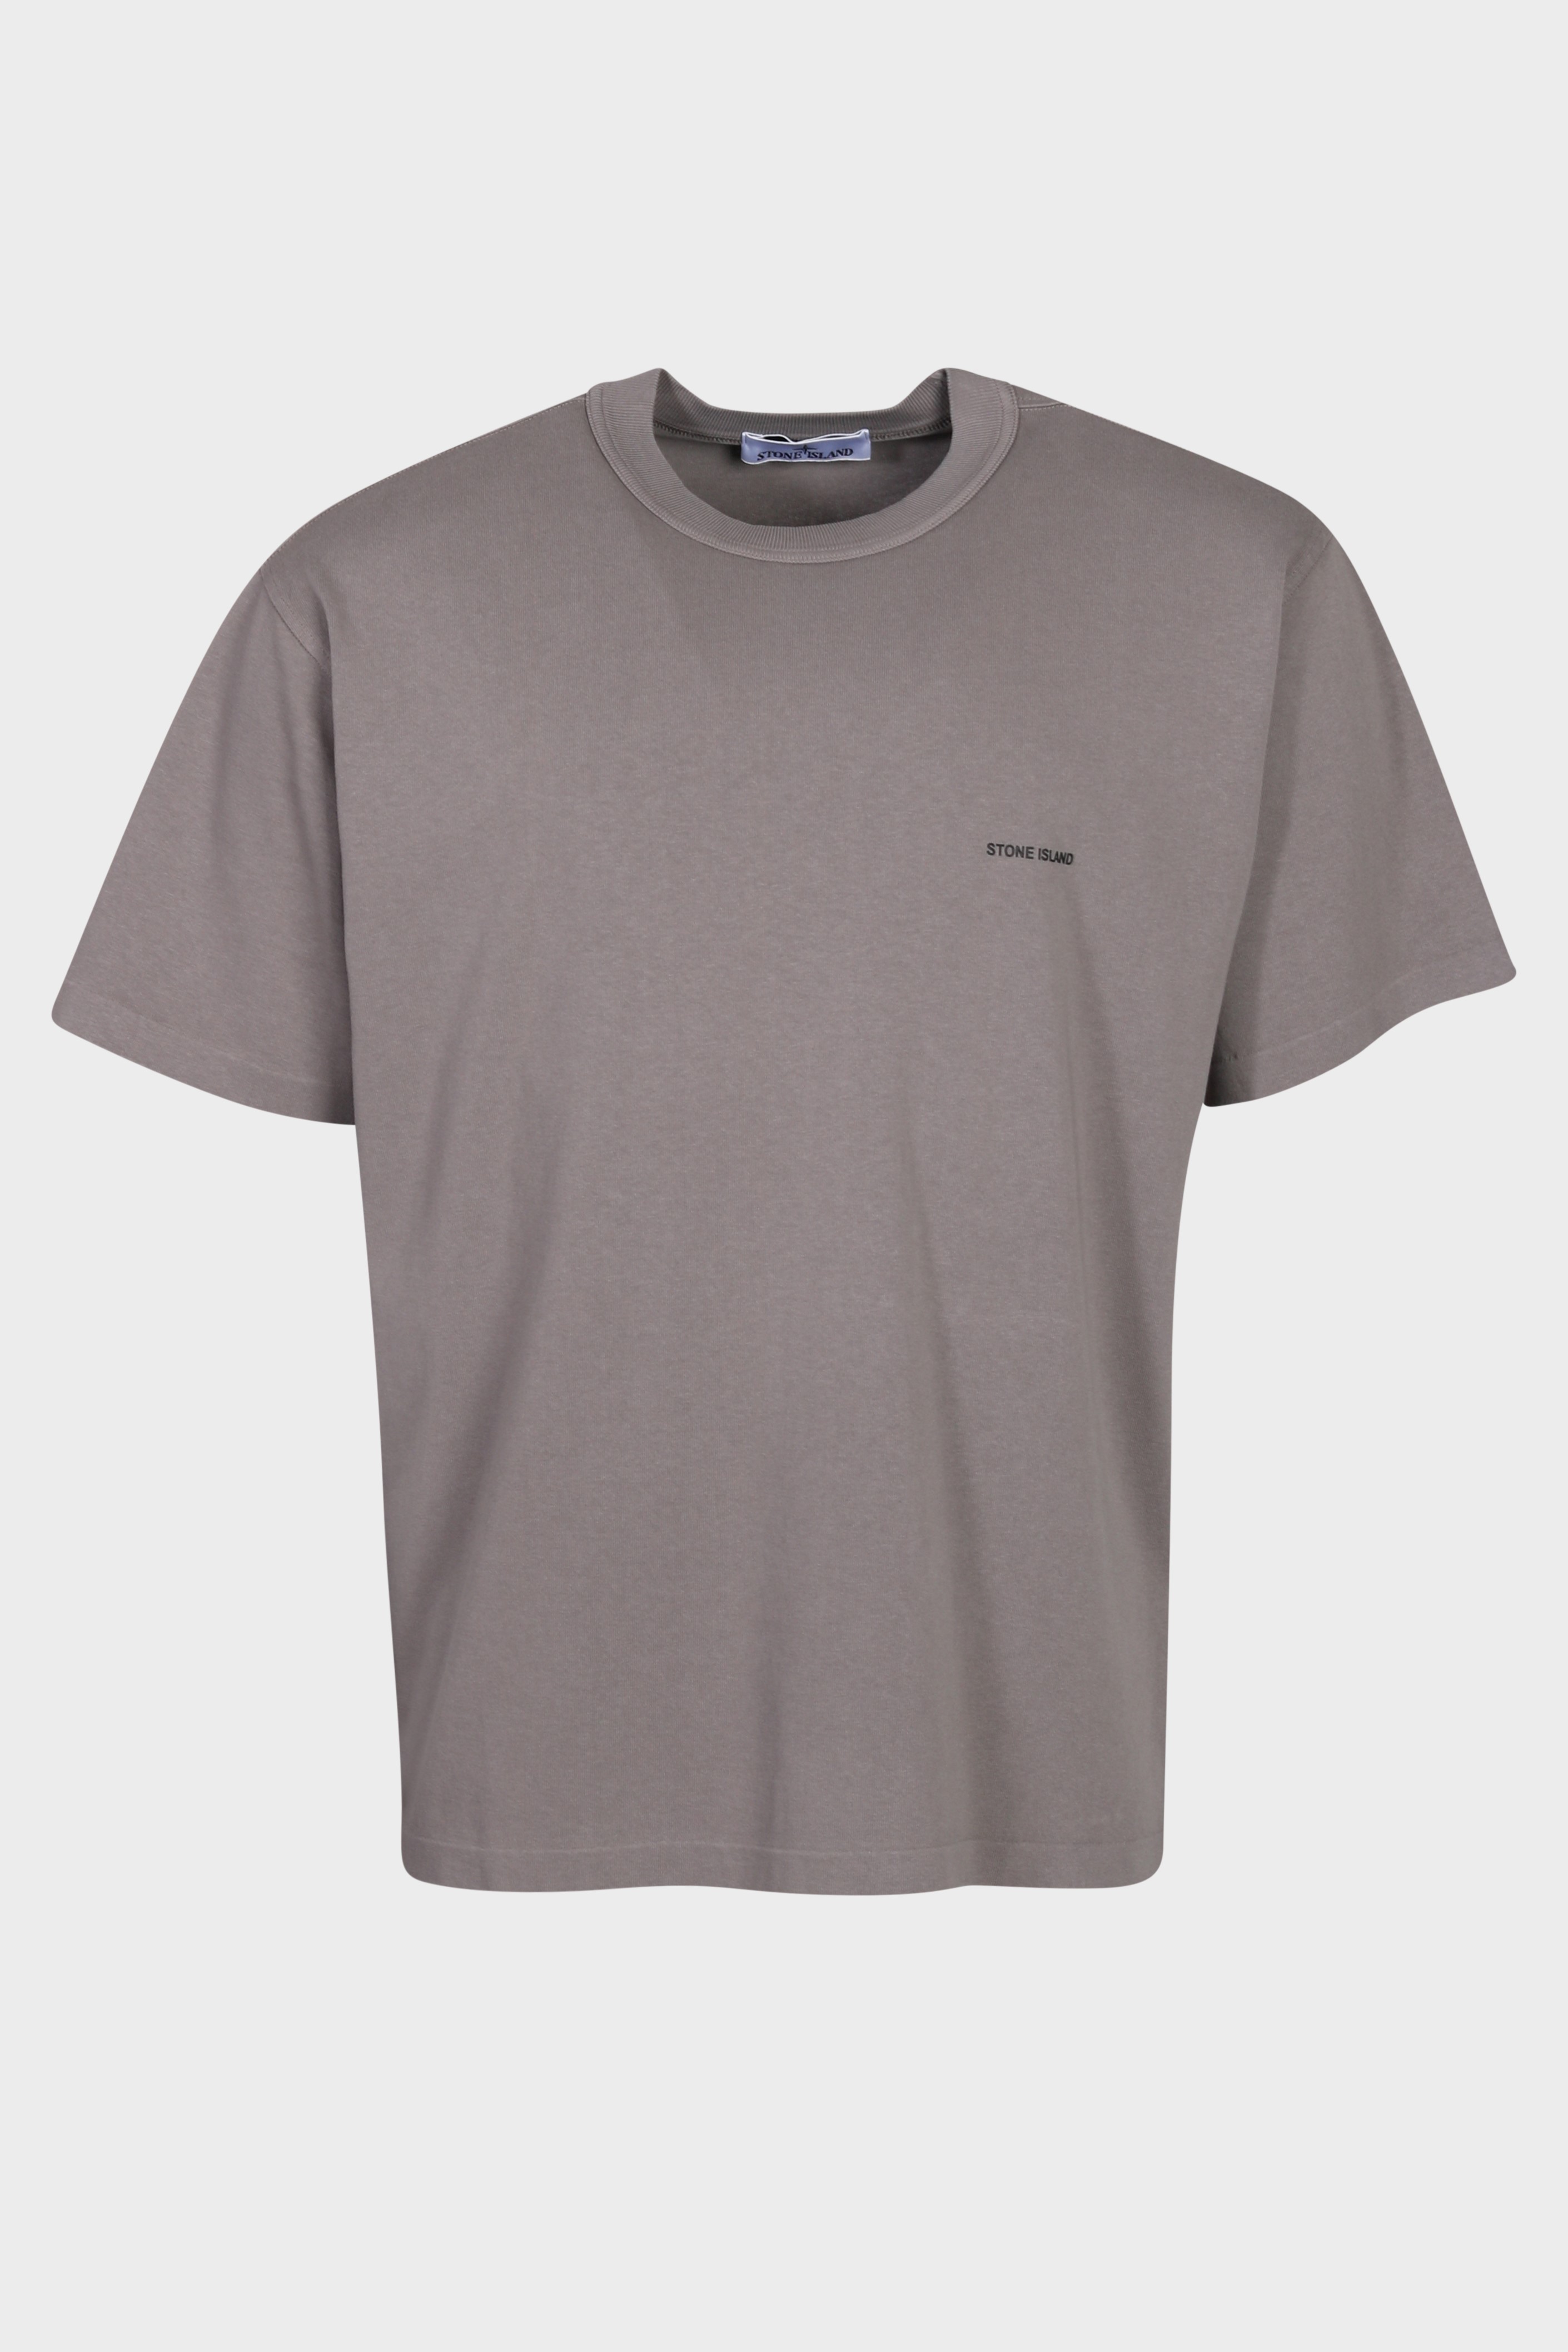 STONE ISLAND Stamp T-Shirt in Brown